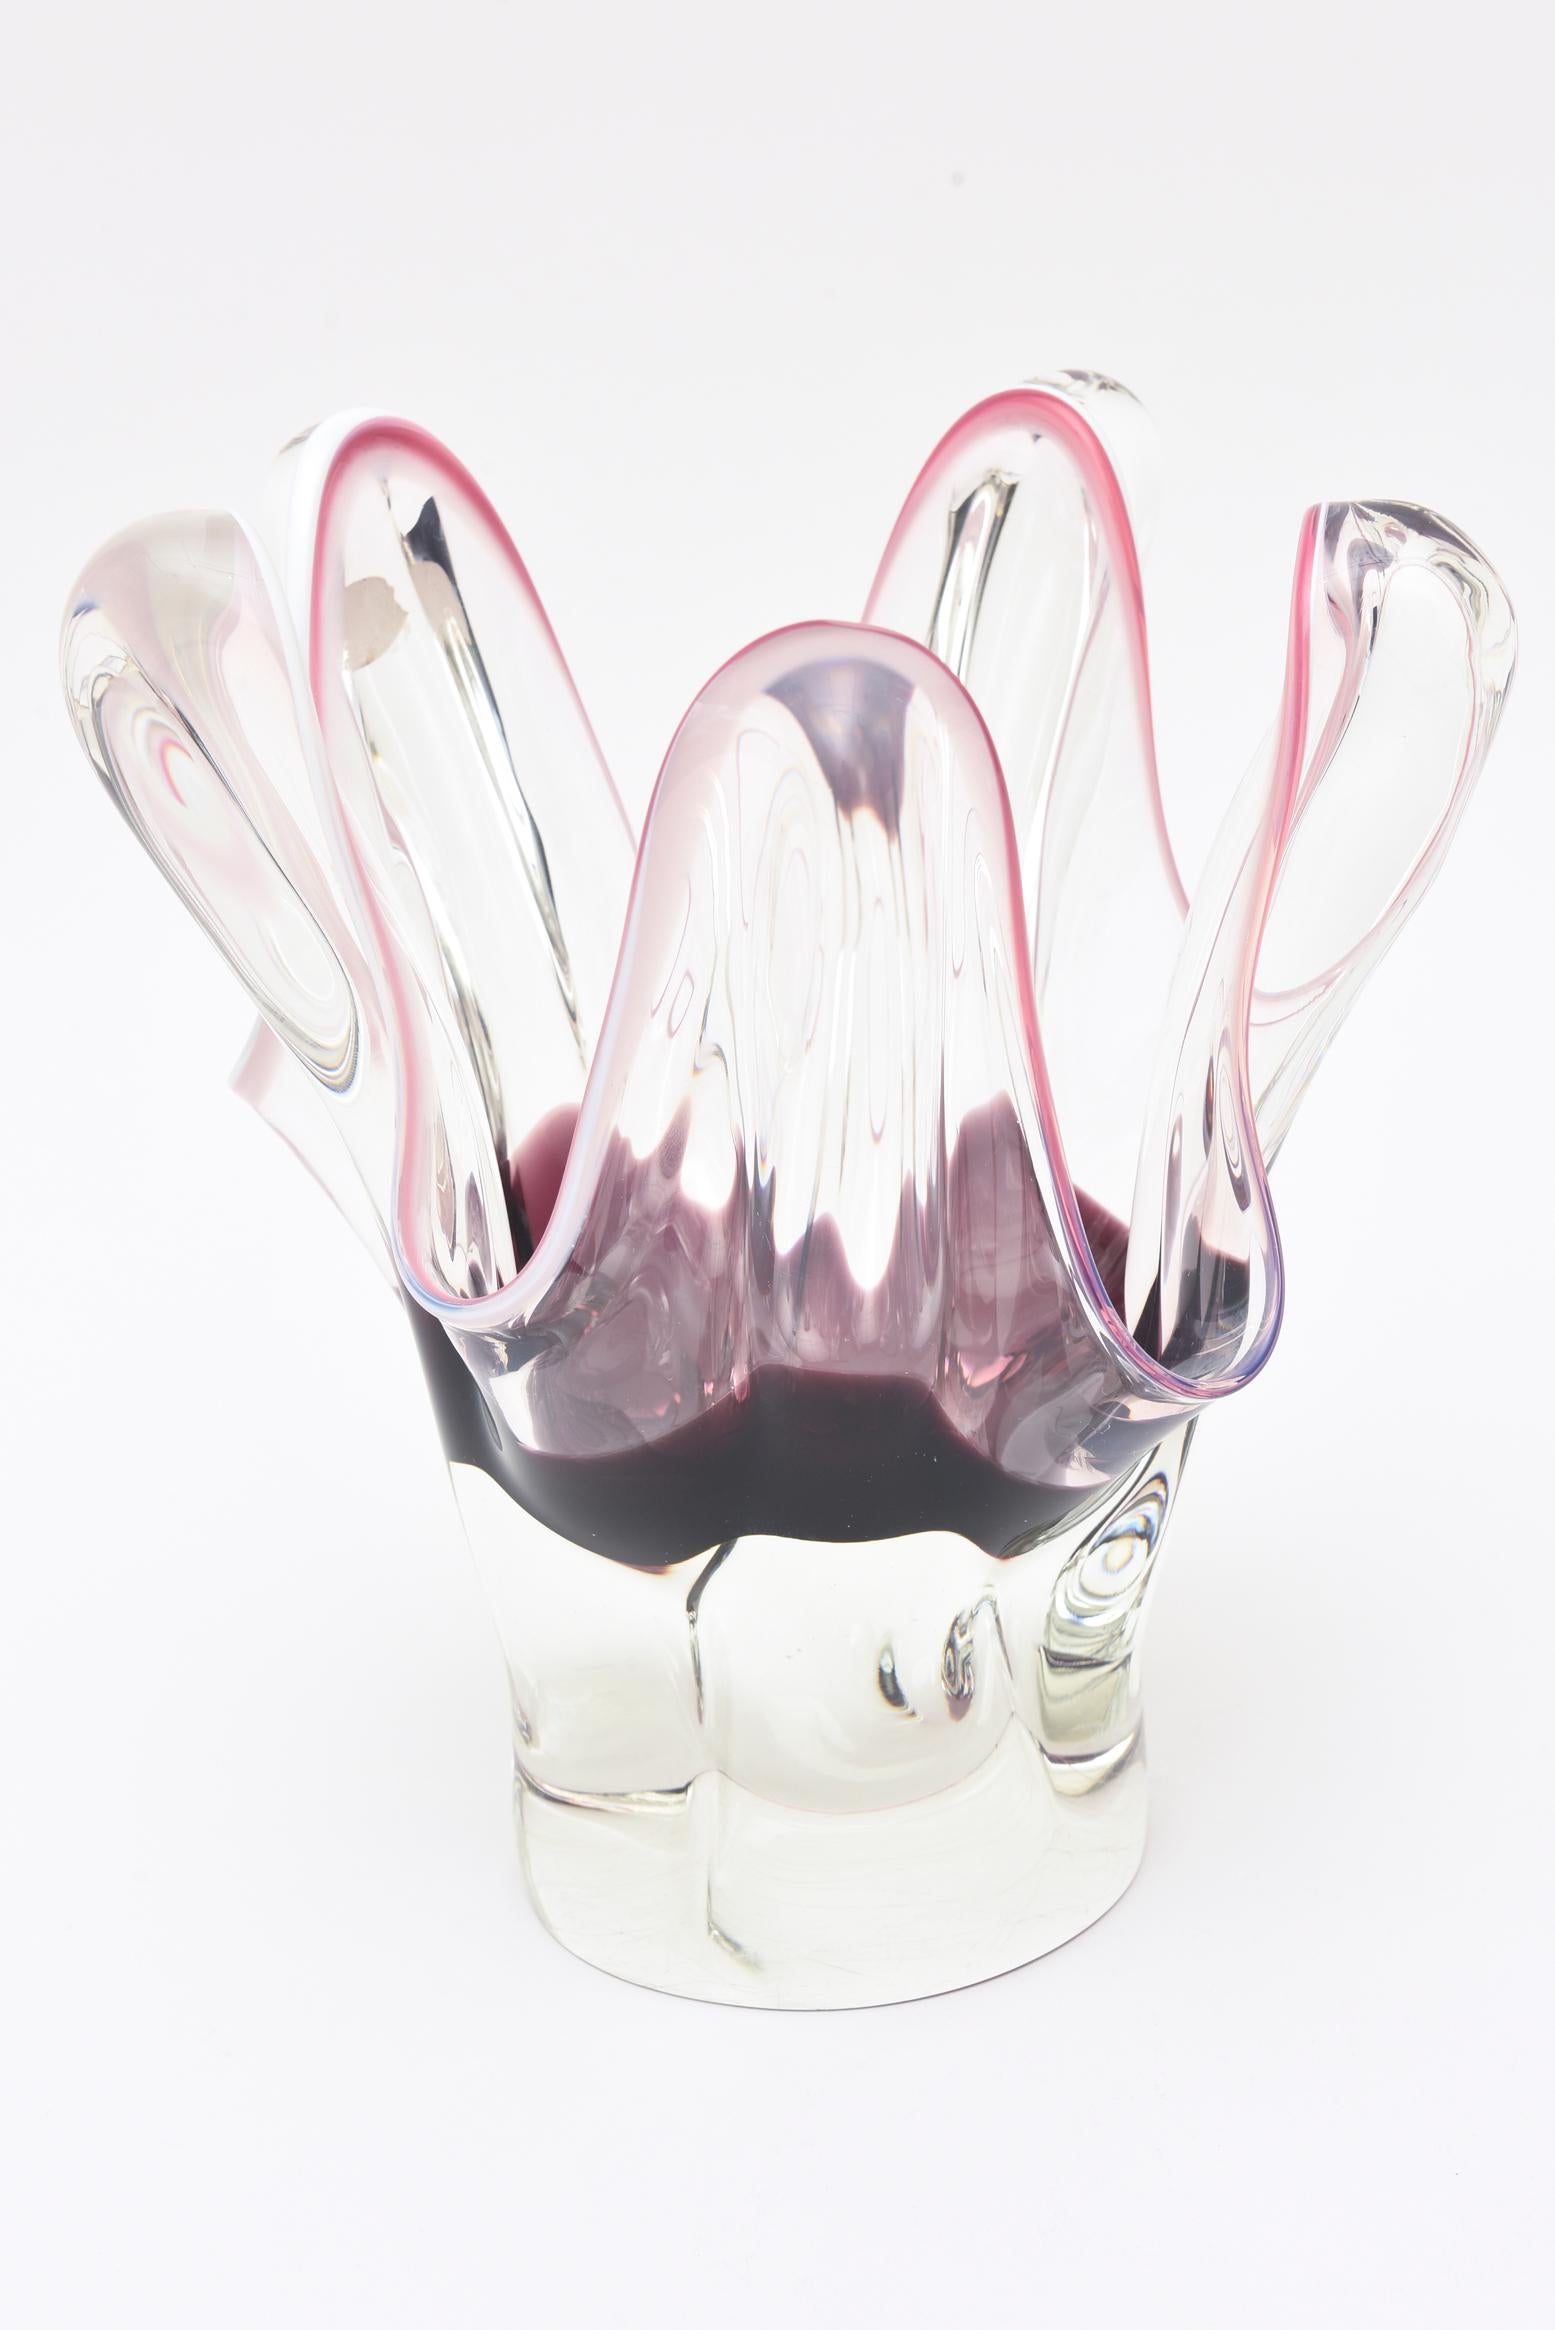 This unusual vintage Czech bohemia sommerso glass vase and or vessel is vintage from the 60s. The form is tentacle octopus shape with irregular forms that look like organic shapes. The sommerso colors are purple, to aubergine to pink outlines with